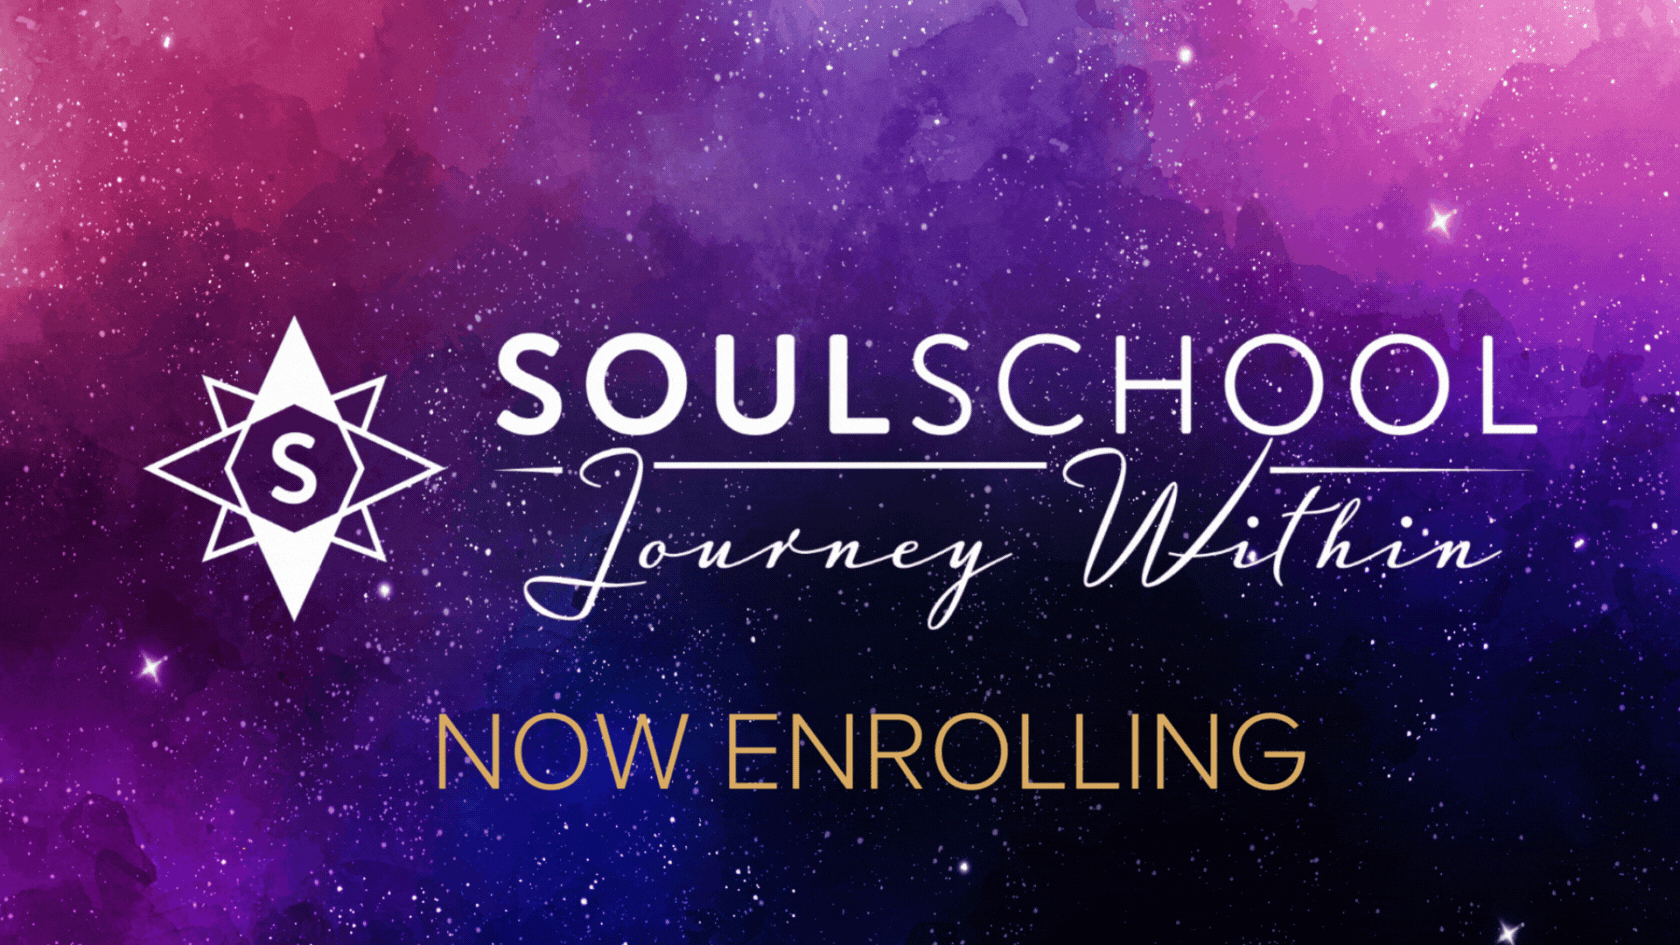 image with purple gradient background with text reading "Soul School Journey Within Now Enrolling"